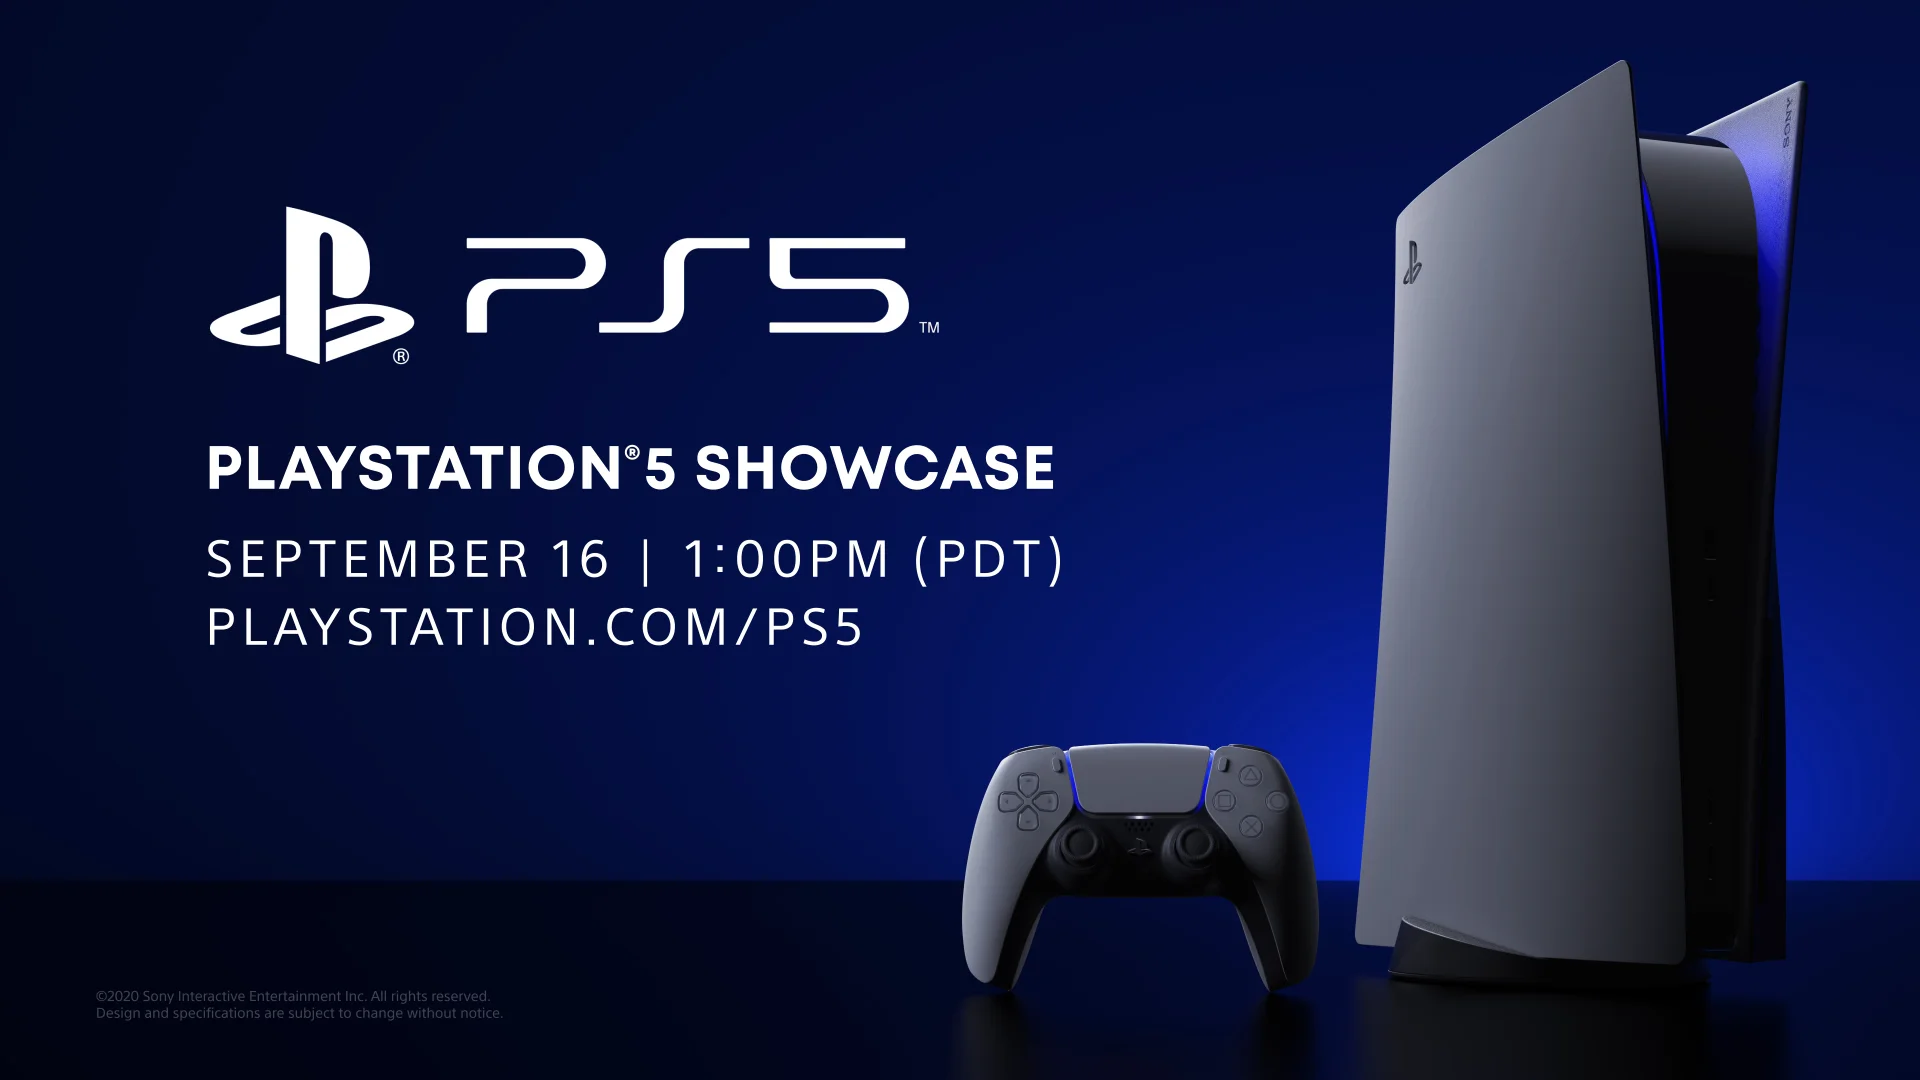 Playstation 5 Showcase - Viewership, Overview, Prize Pool